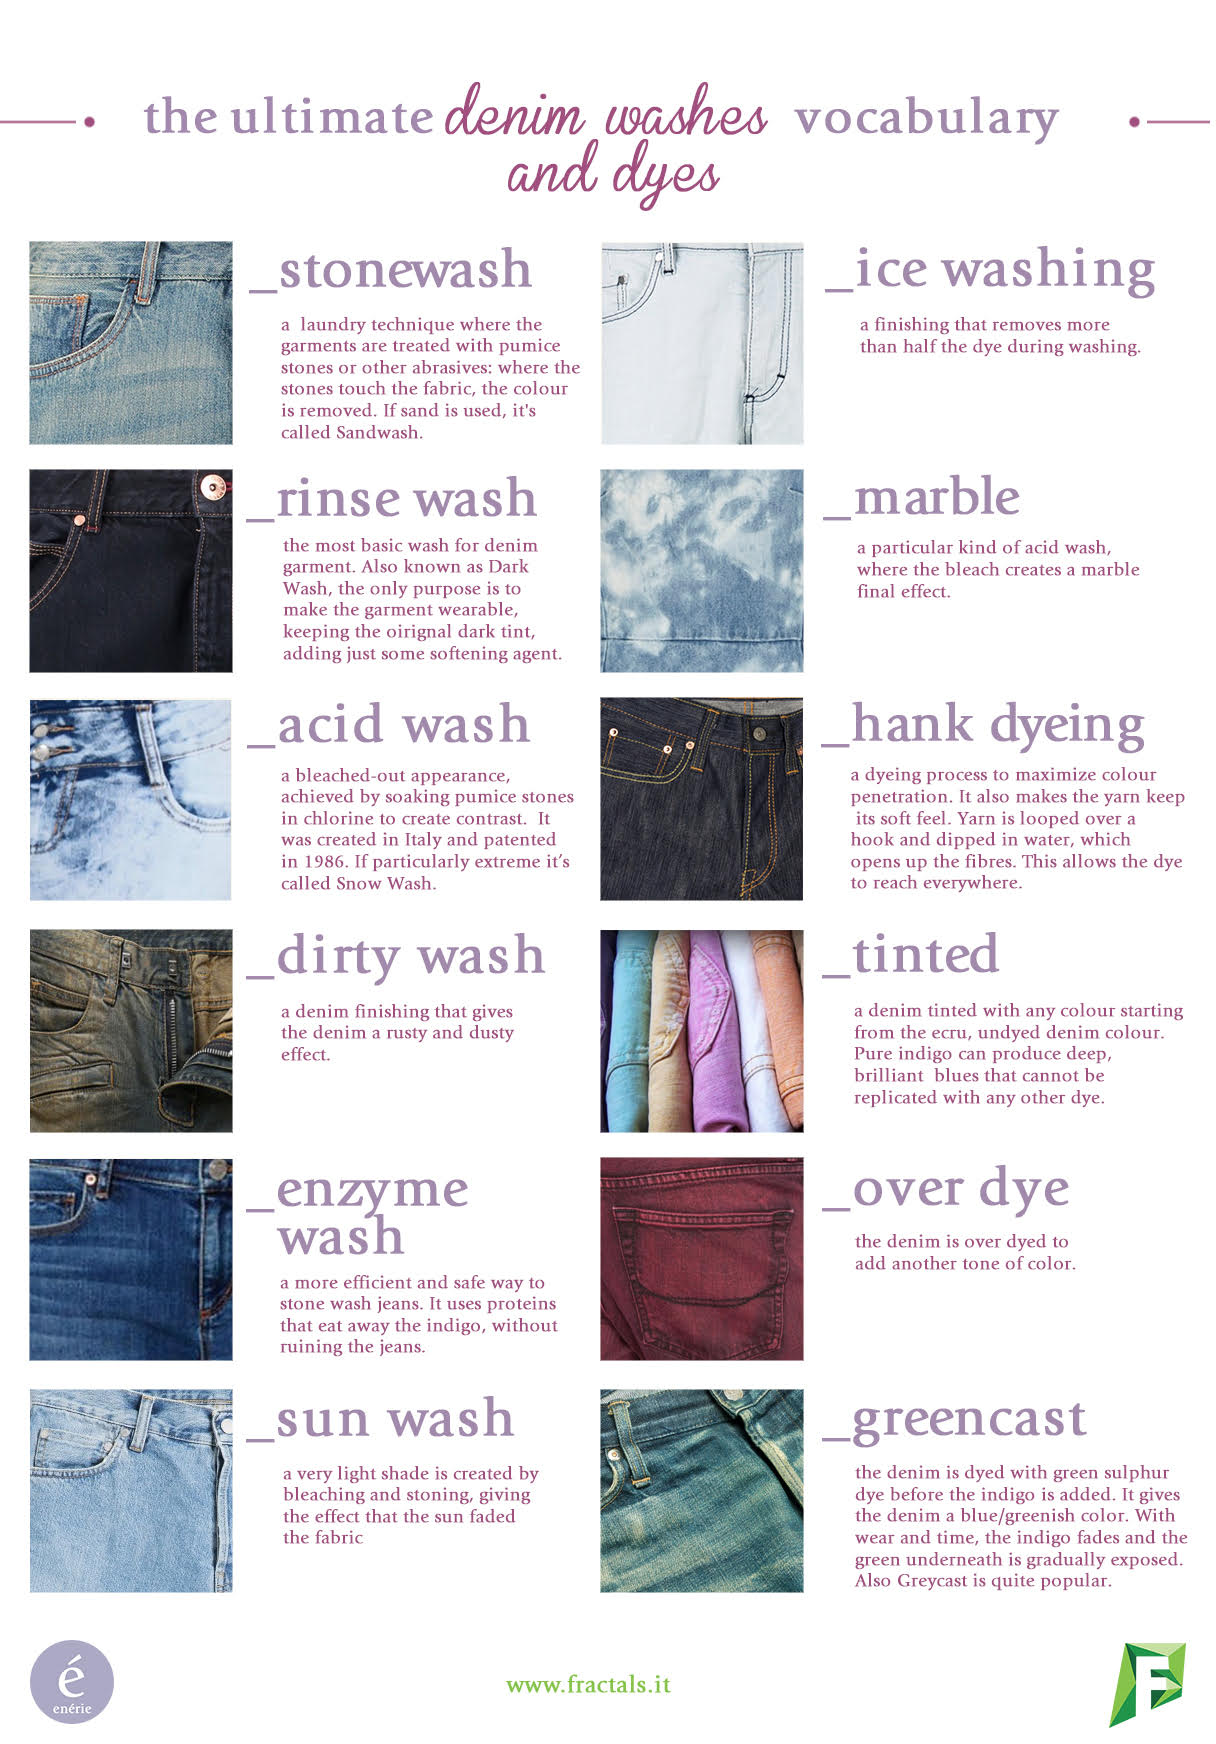 washes of jeans